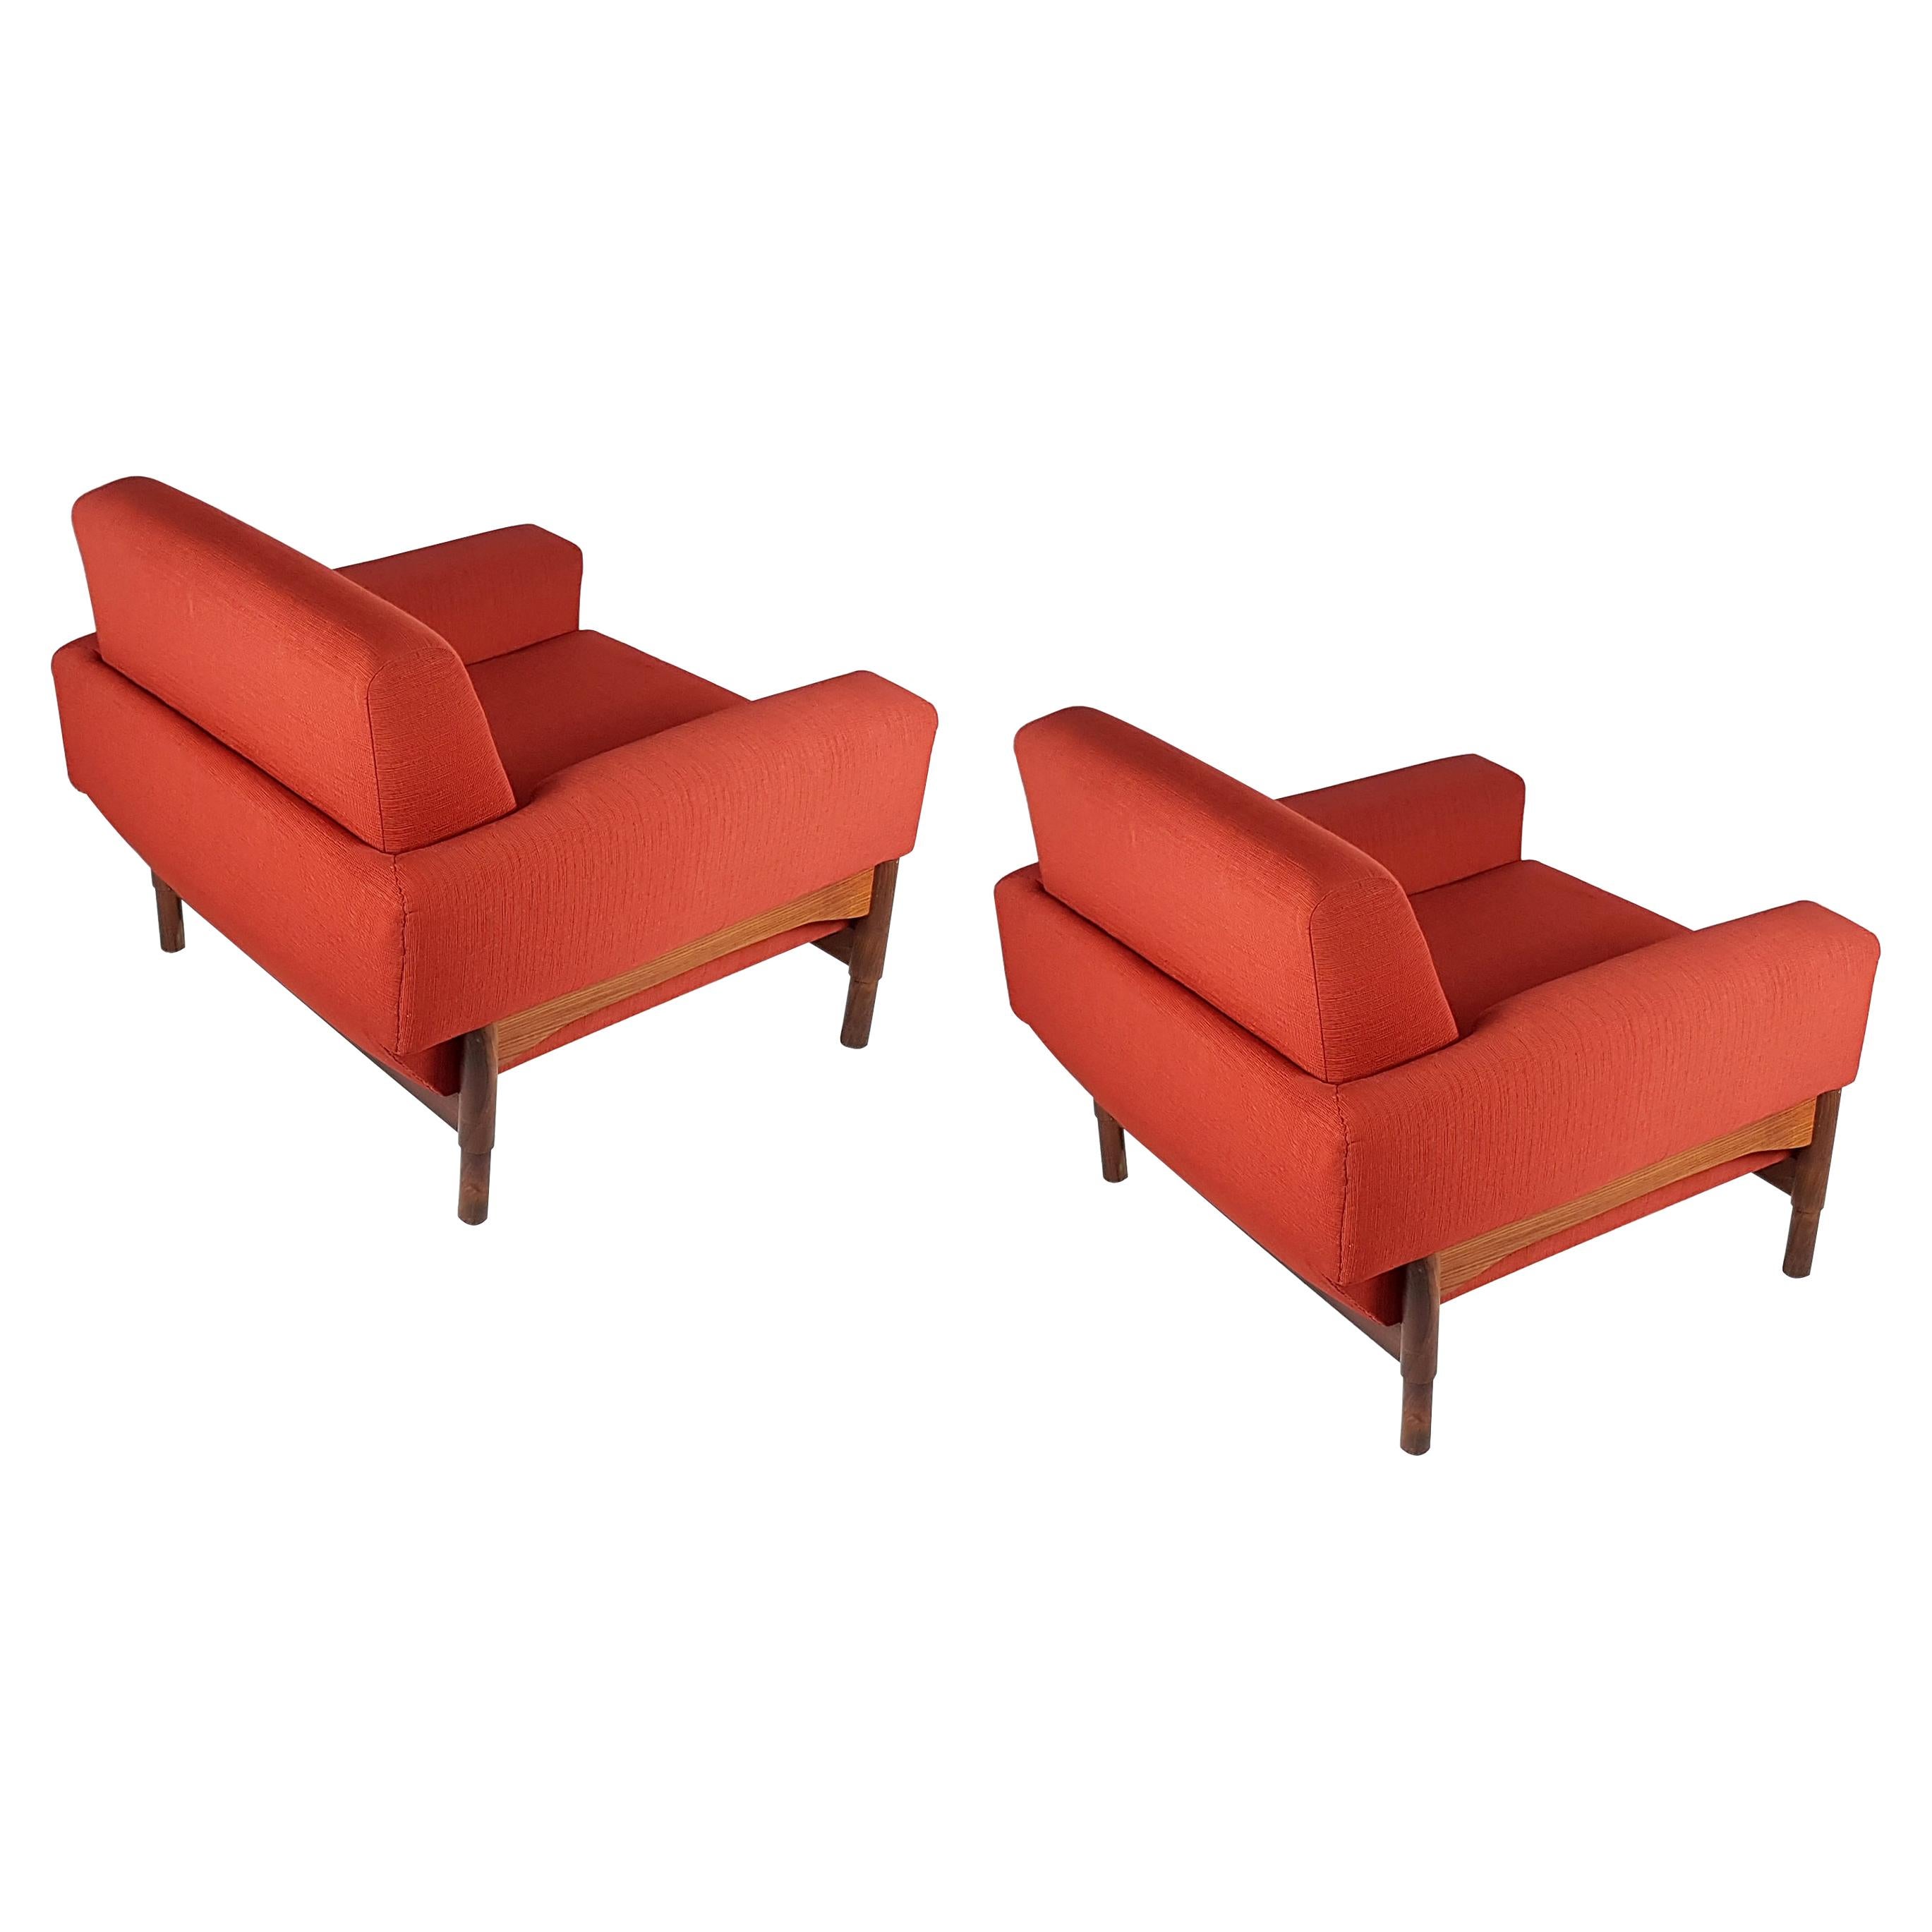 Pair of Wood & Brick Red Fabric 1960 Armchair by S. Saporiti for F.Lli Saporiti For Sale